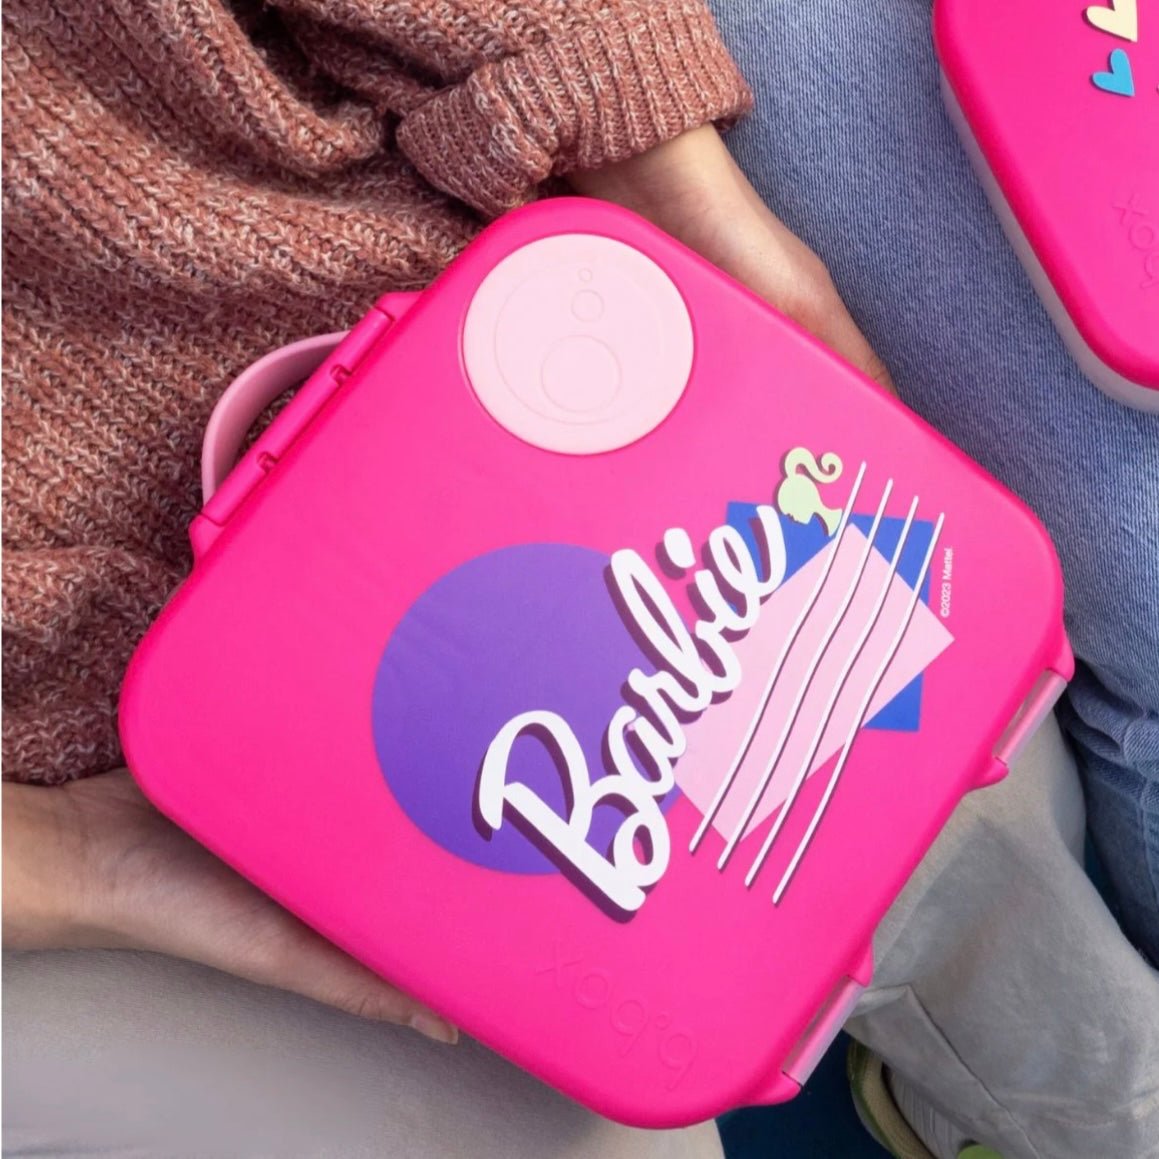 B.BOX | LUNCHBOX - BARBIE™ *PRE-ORDER* by B.BOX - The Playful Collective